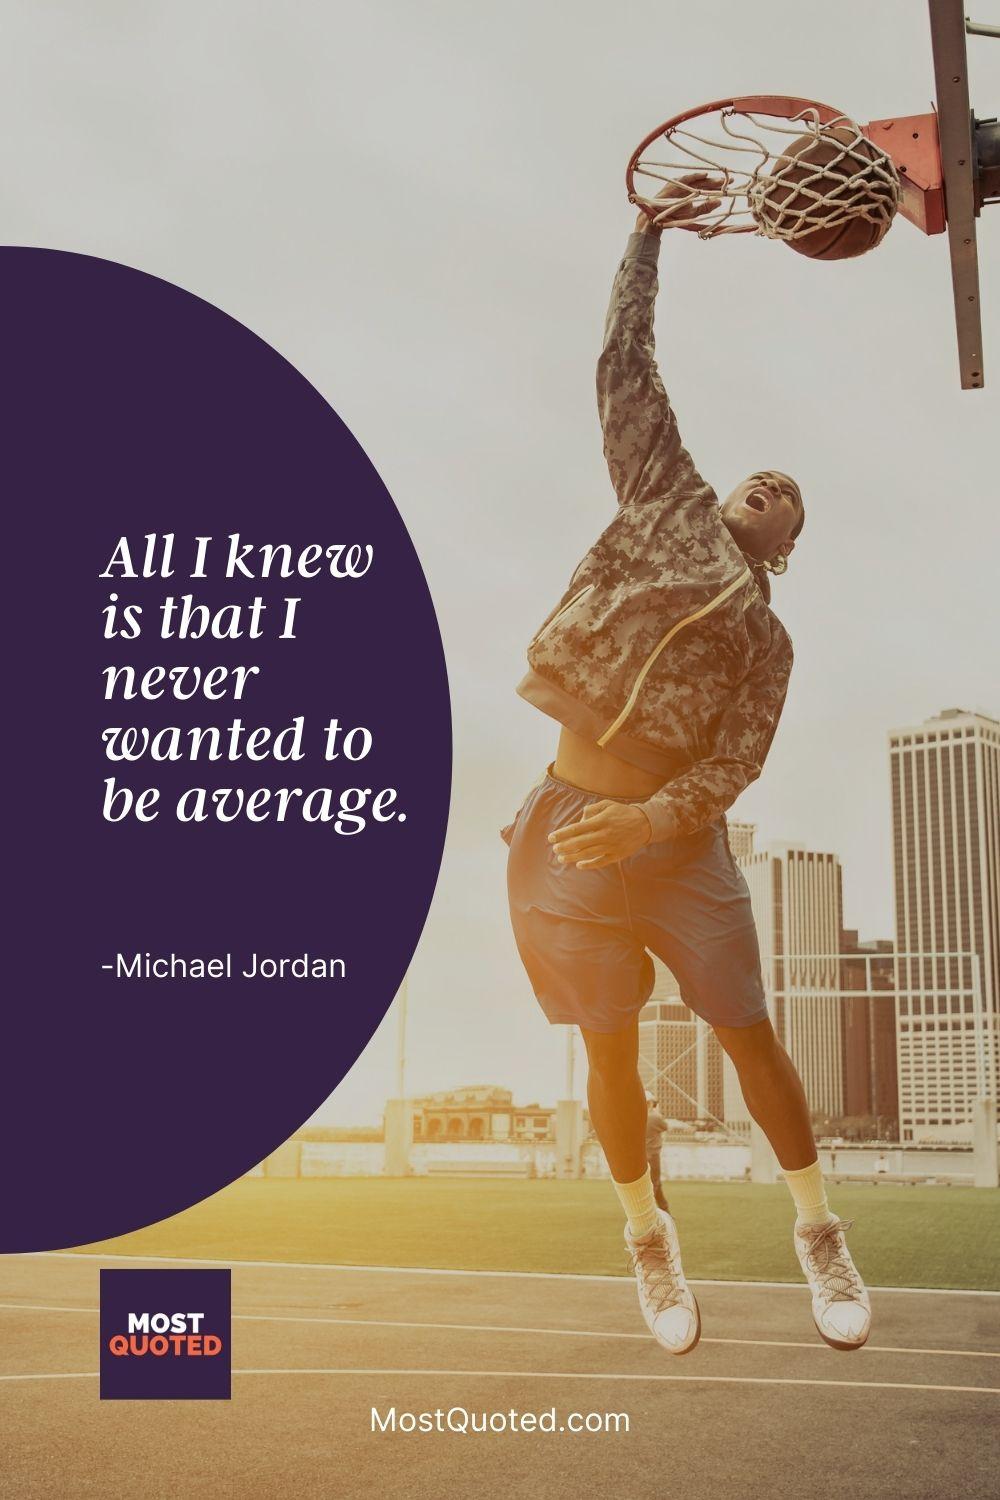 All I knew is that I never wanted to be average. - Michael Jordan